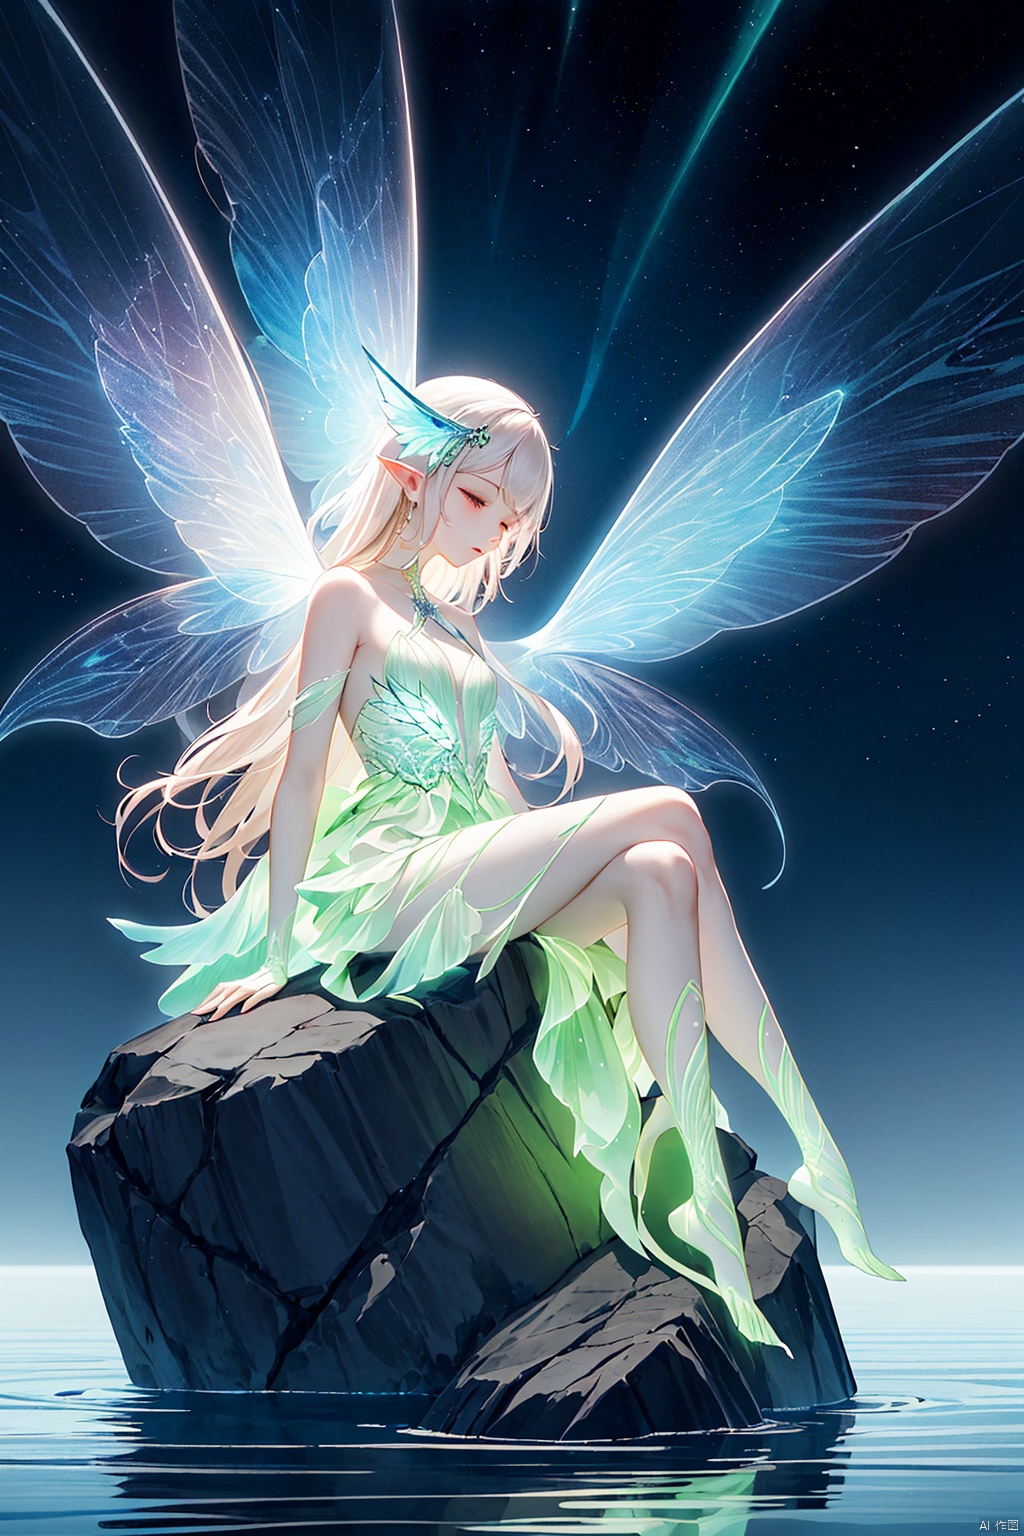  Best quality,8k,cg,
a woman sitting on a rock in the water with a green fairy dress, astral fairy, water fairy, glowing angelic being, beautiful fairy, glowing aura around her, ethereal wings, beautiful fantasy art, very beautiful fantasy art, beautiful fairies, neon wings, ethereal aurora spirits, very beautiful digital art, beautiful digital art, elven angel meditating in space